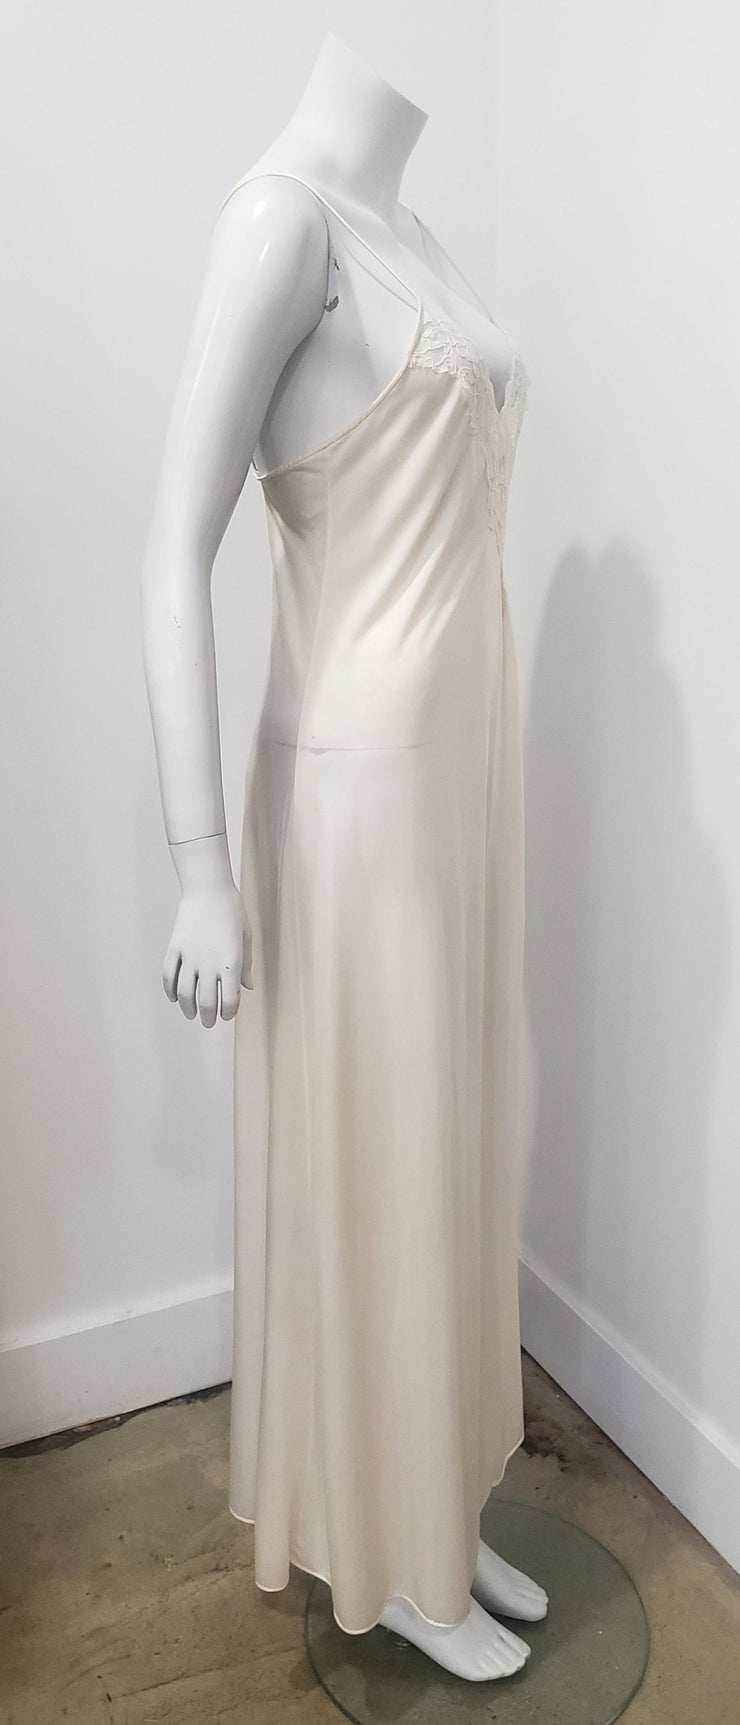 Vintage 70’s Hollywood Glam Romantic Wedding Lace Slit Maxi Nightgown